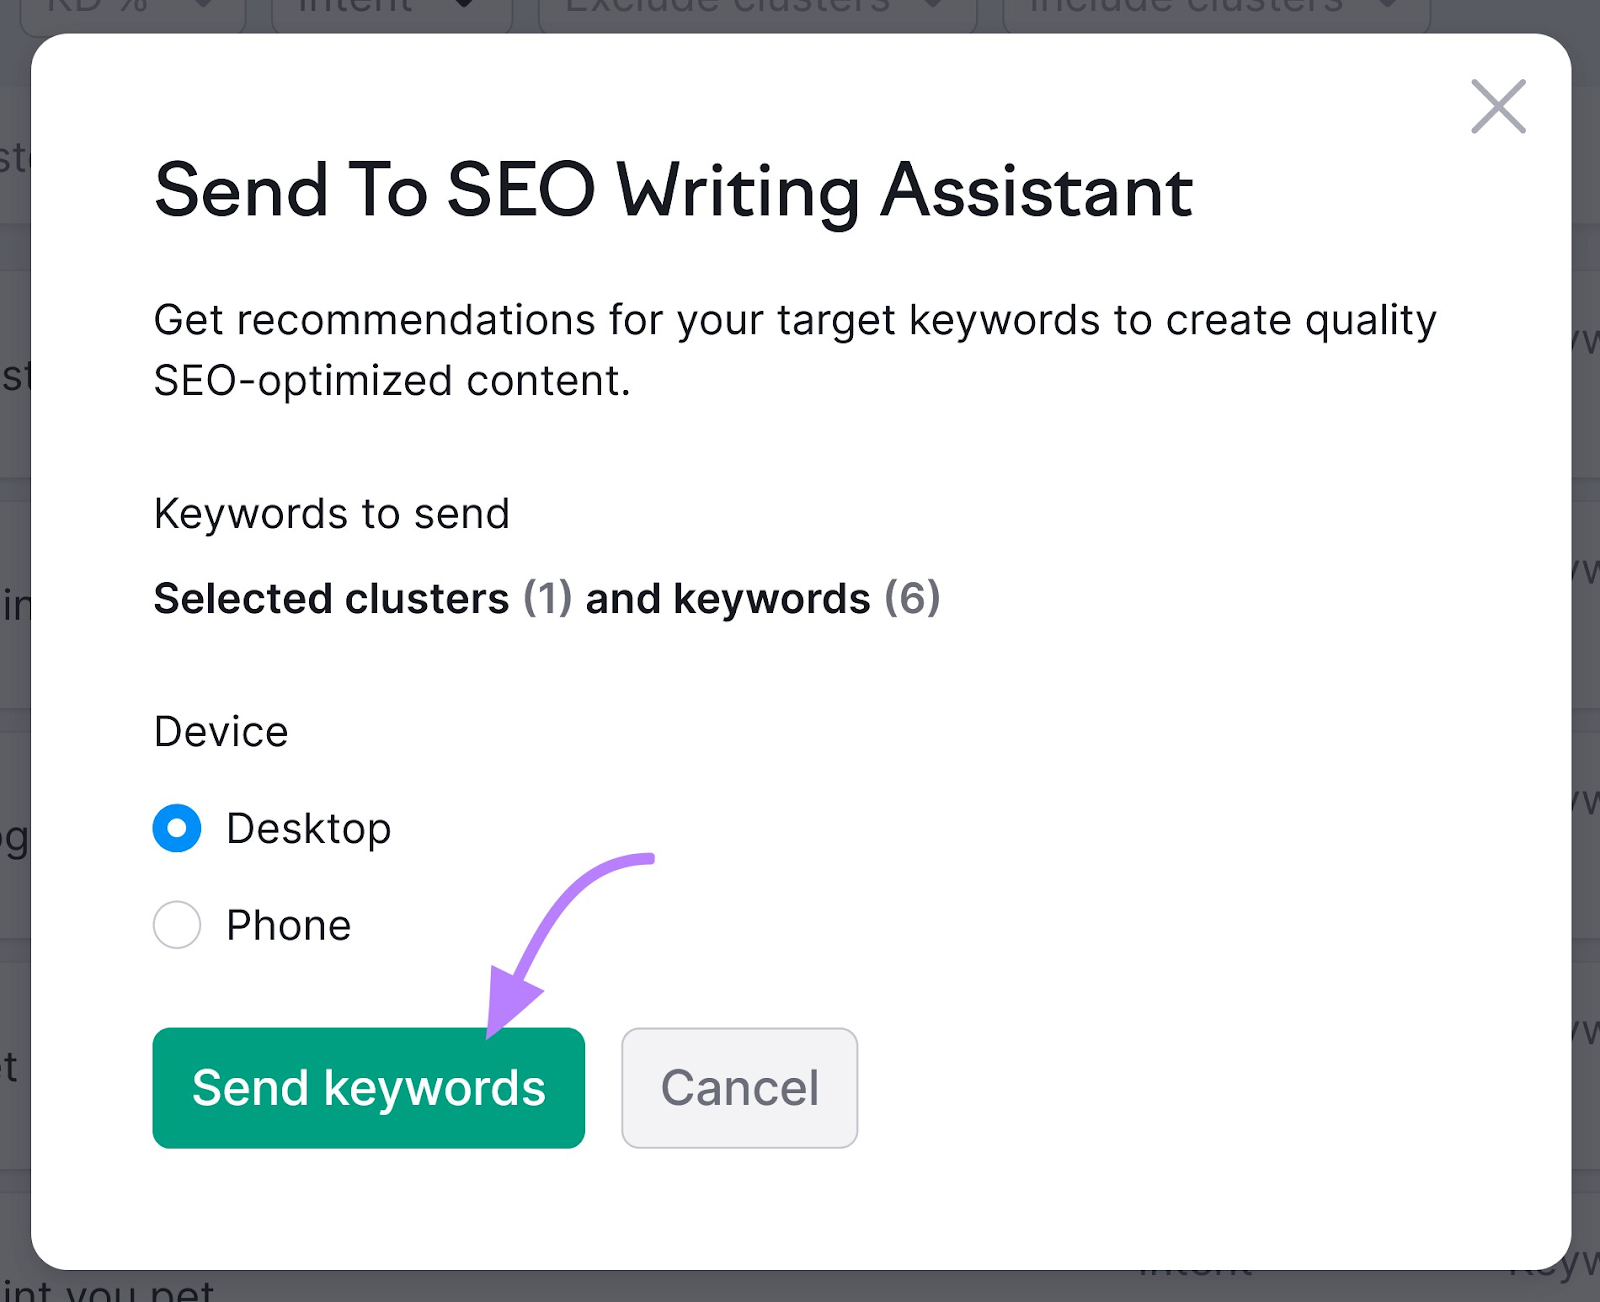 "Send to SEO Writing Assistant" pop-up window